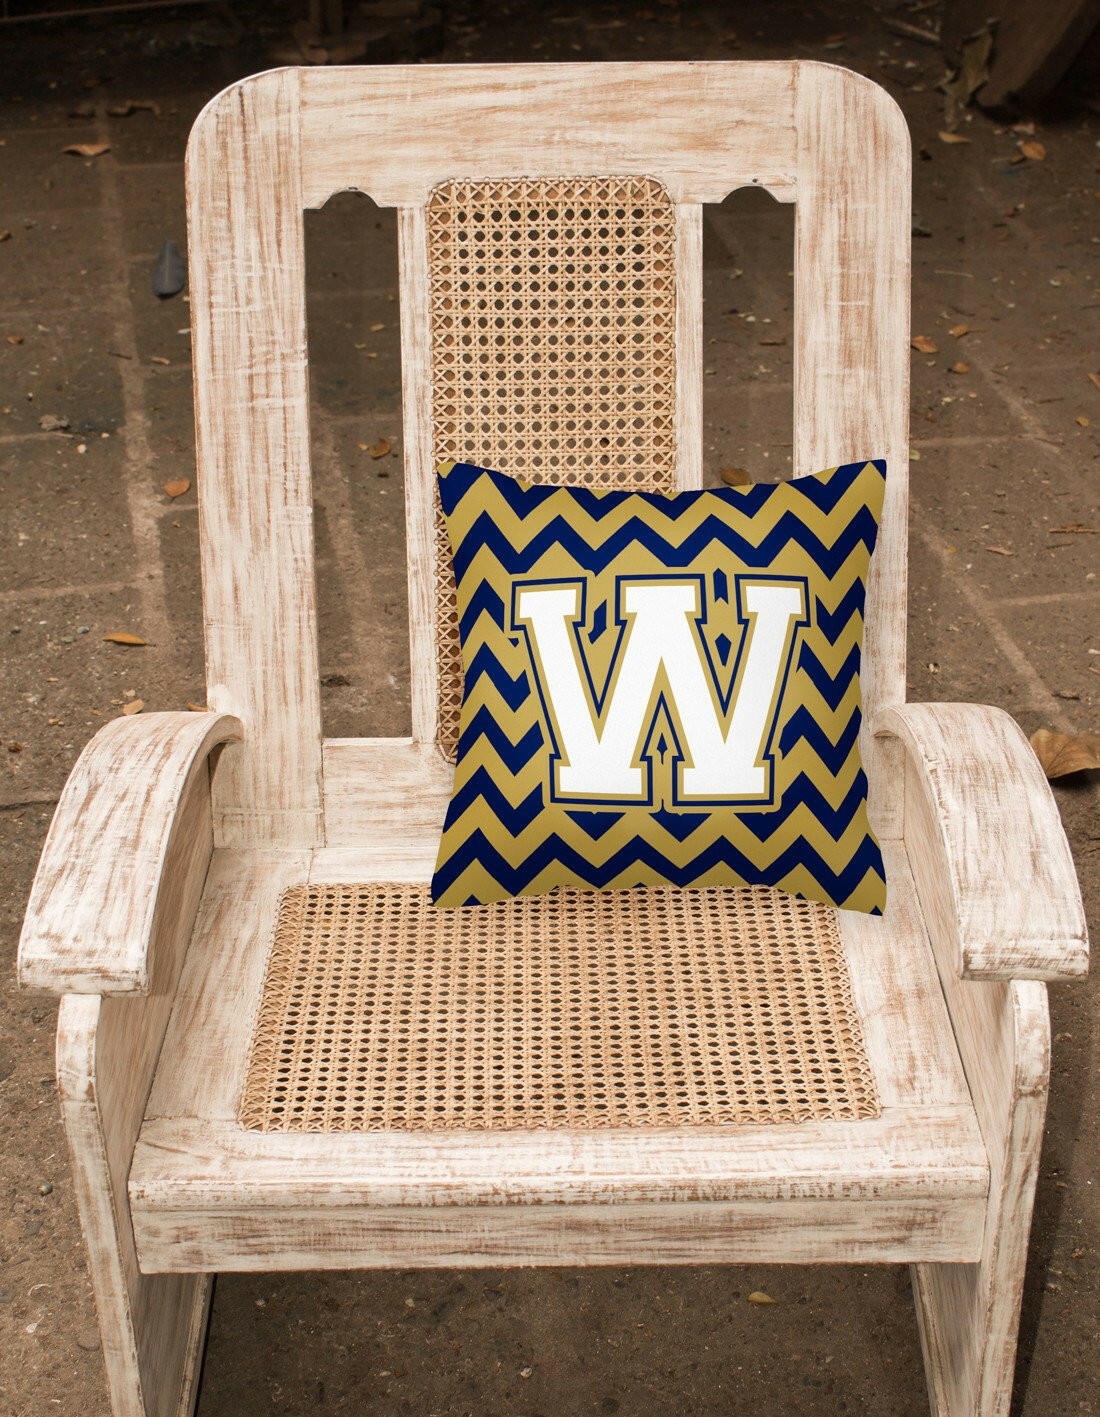 Letter W Chevron Navy Blue and Gold Fabric Decorative Pillow CJ1057-WPW1414 by Caroline's Treasures